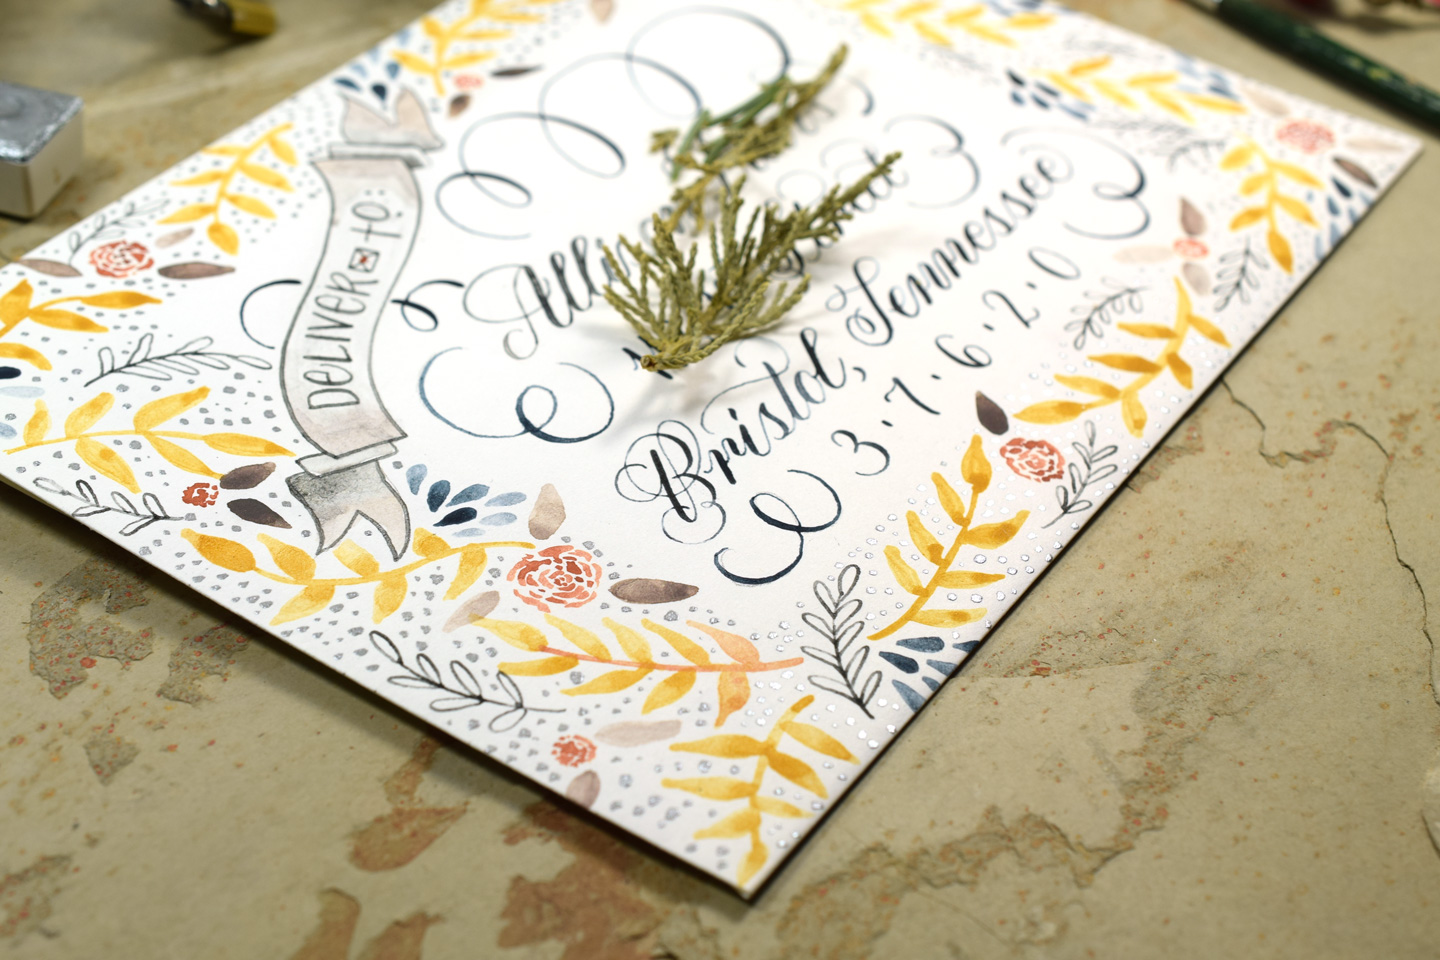 7 Tips for Creating Watercolor Calligraphy + a G&B Watercolor Giveaway